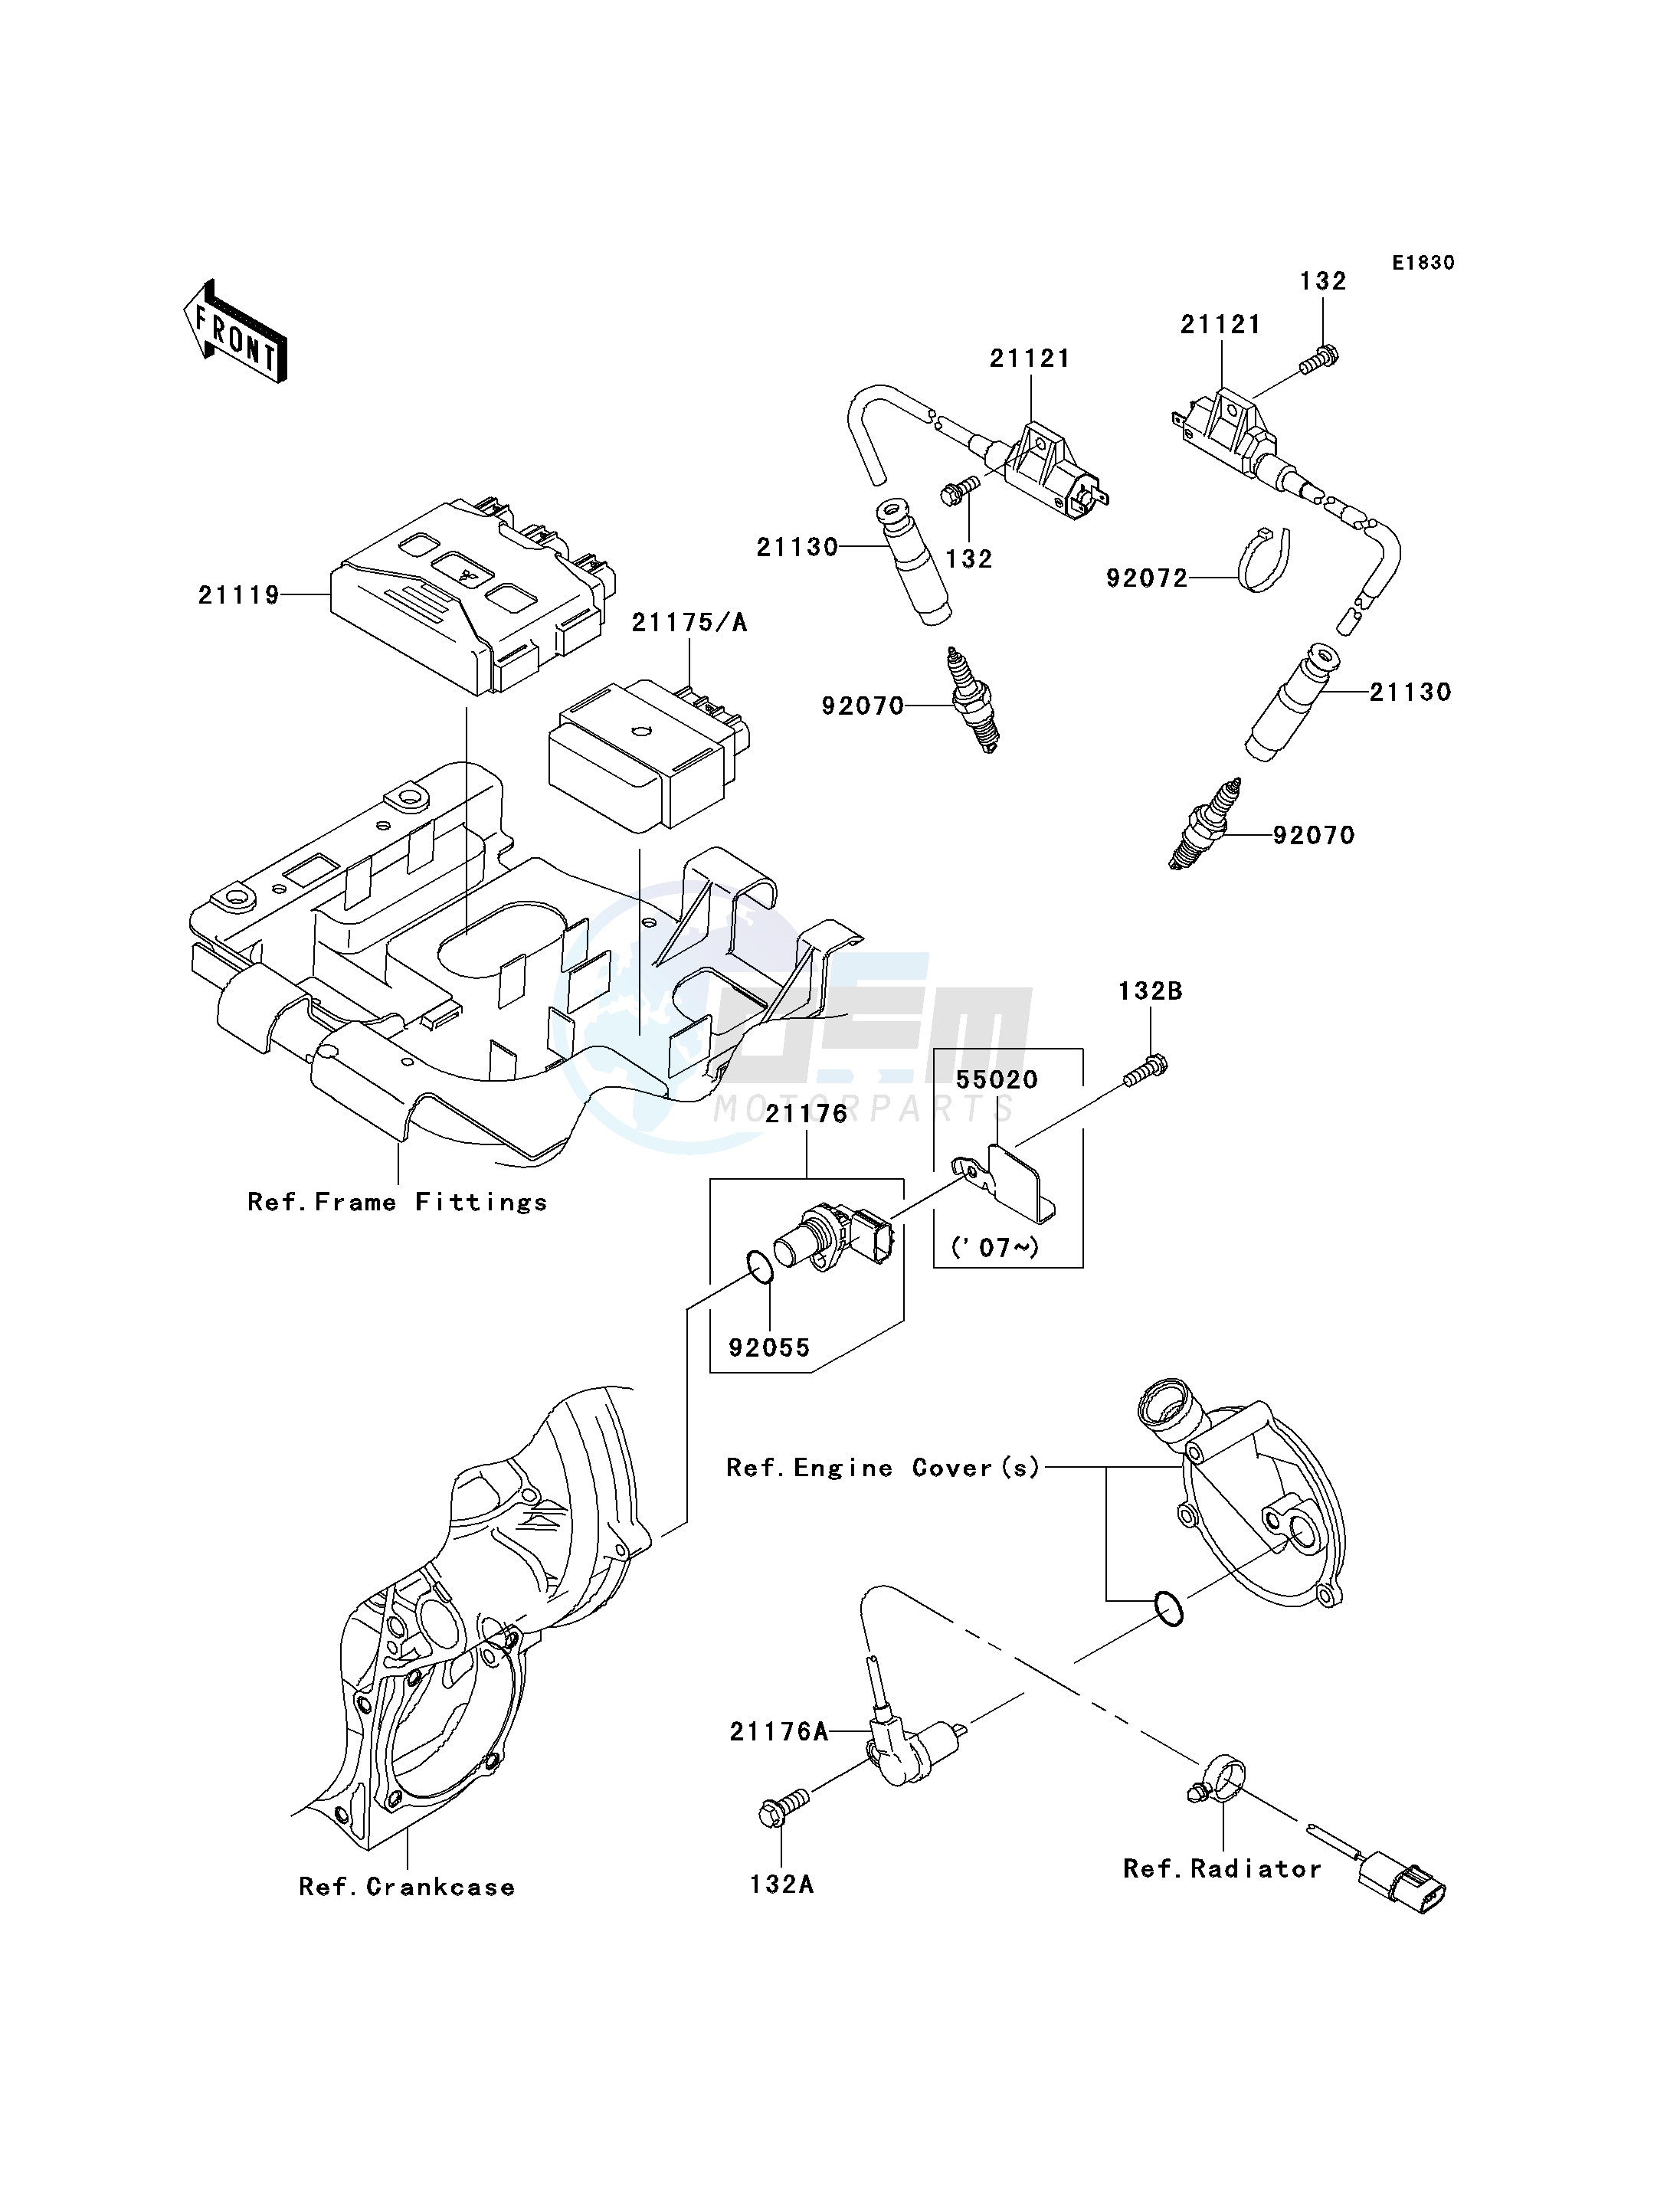 IGNITION SYSTEM image